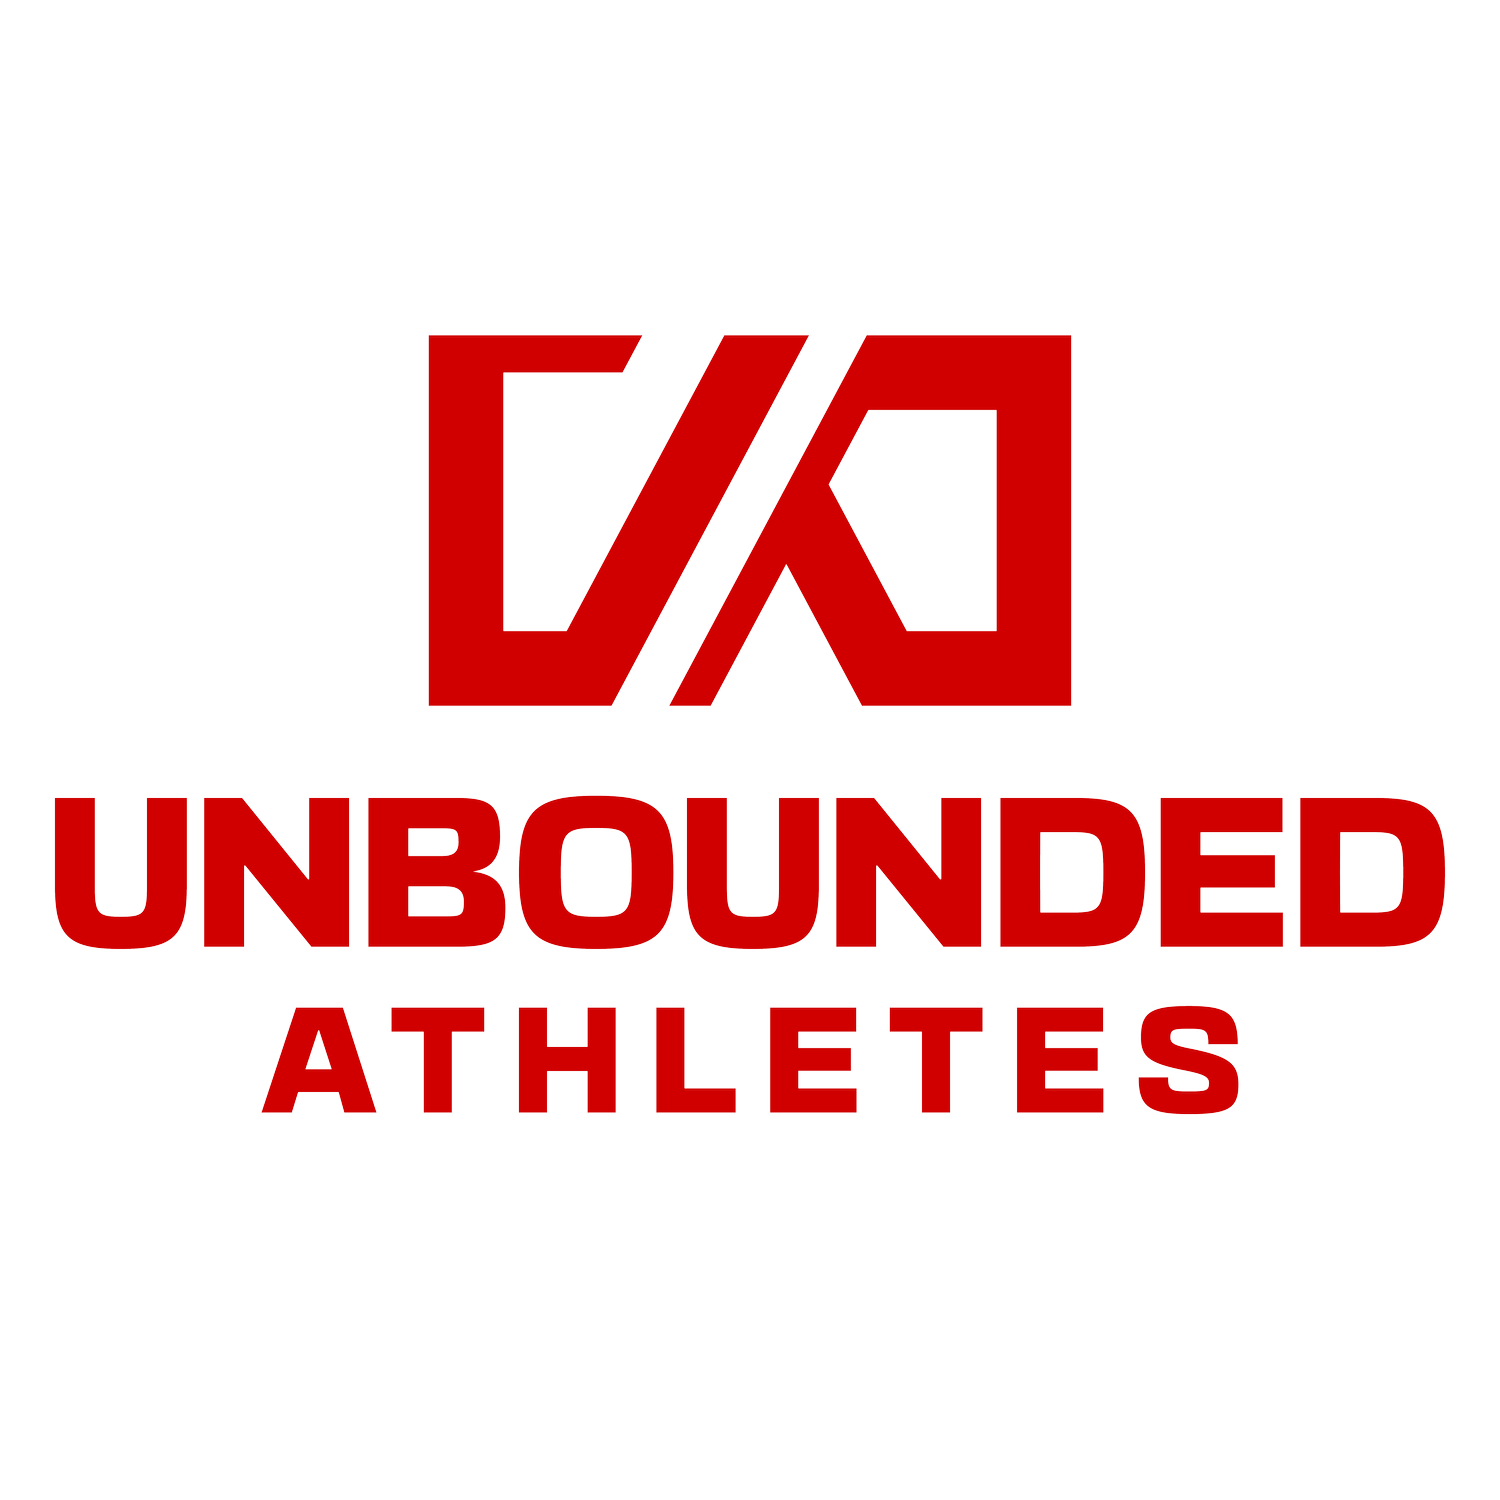 UNBOUNDED ATHLETES